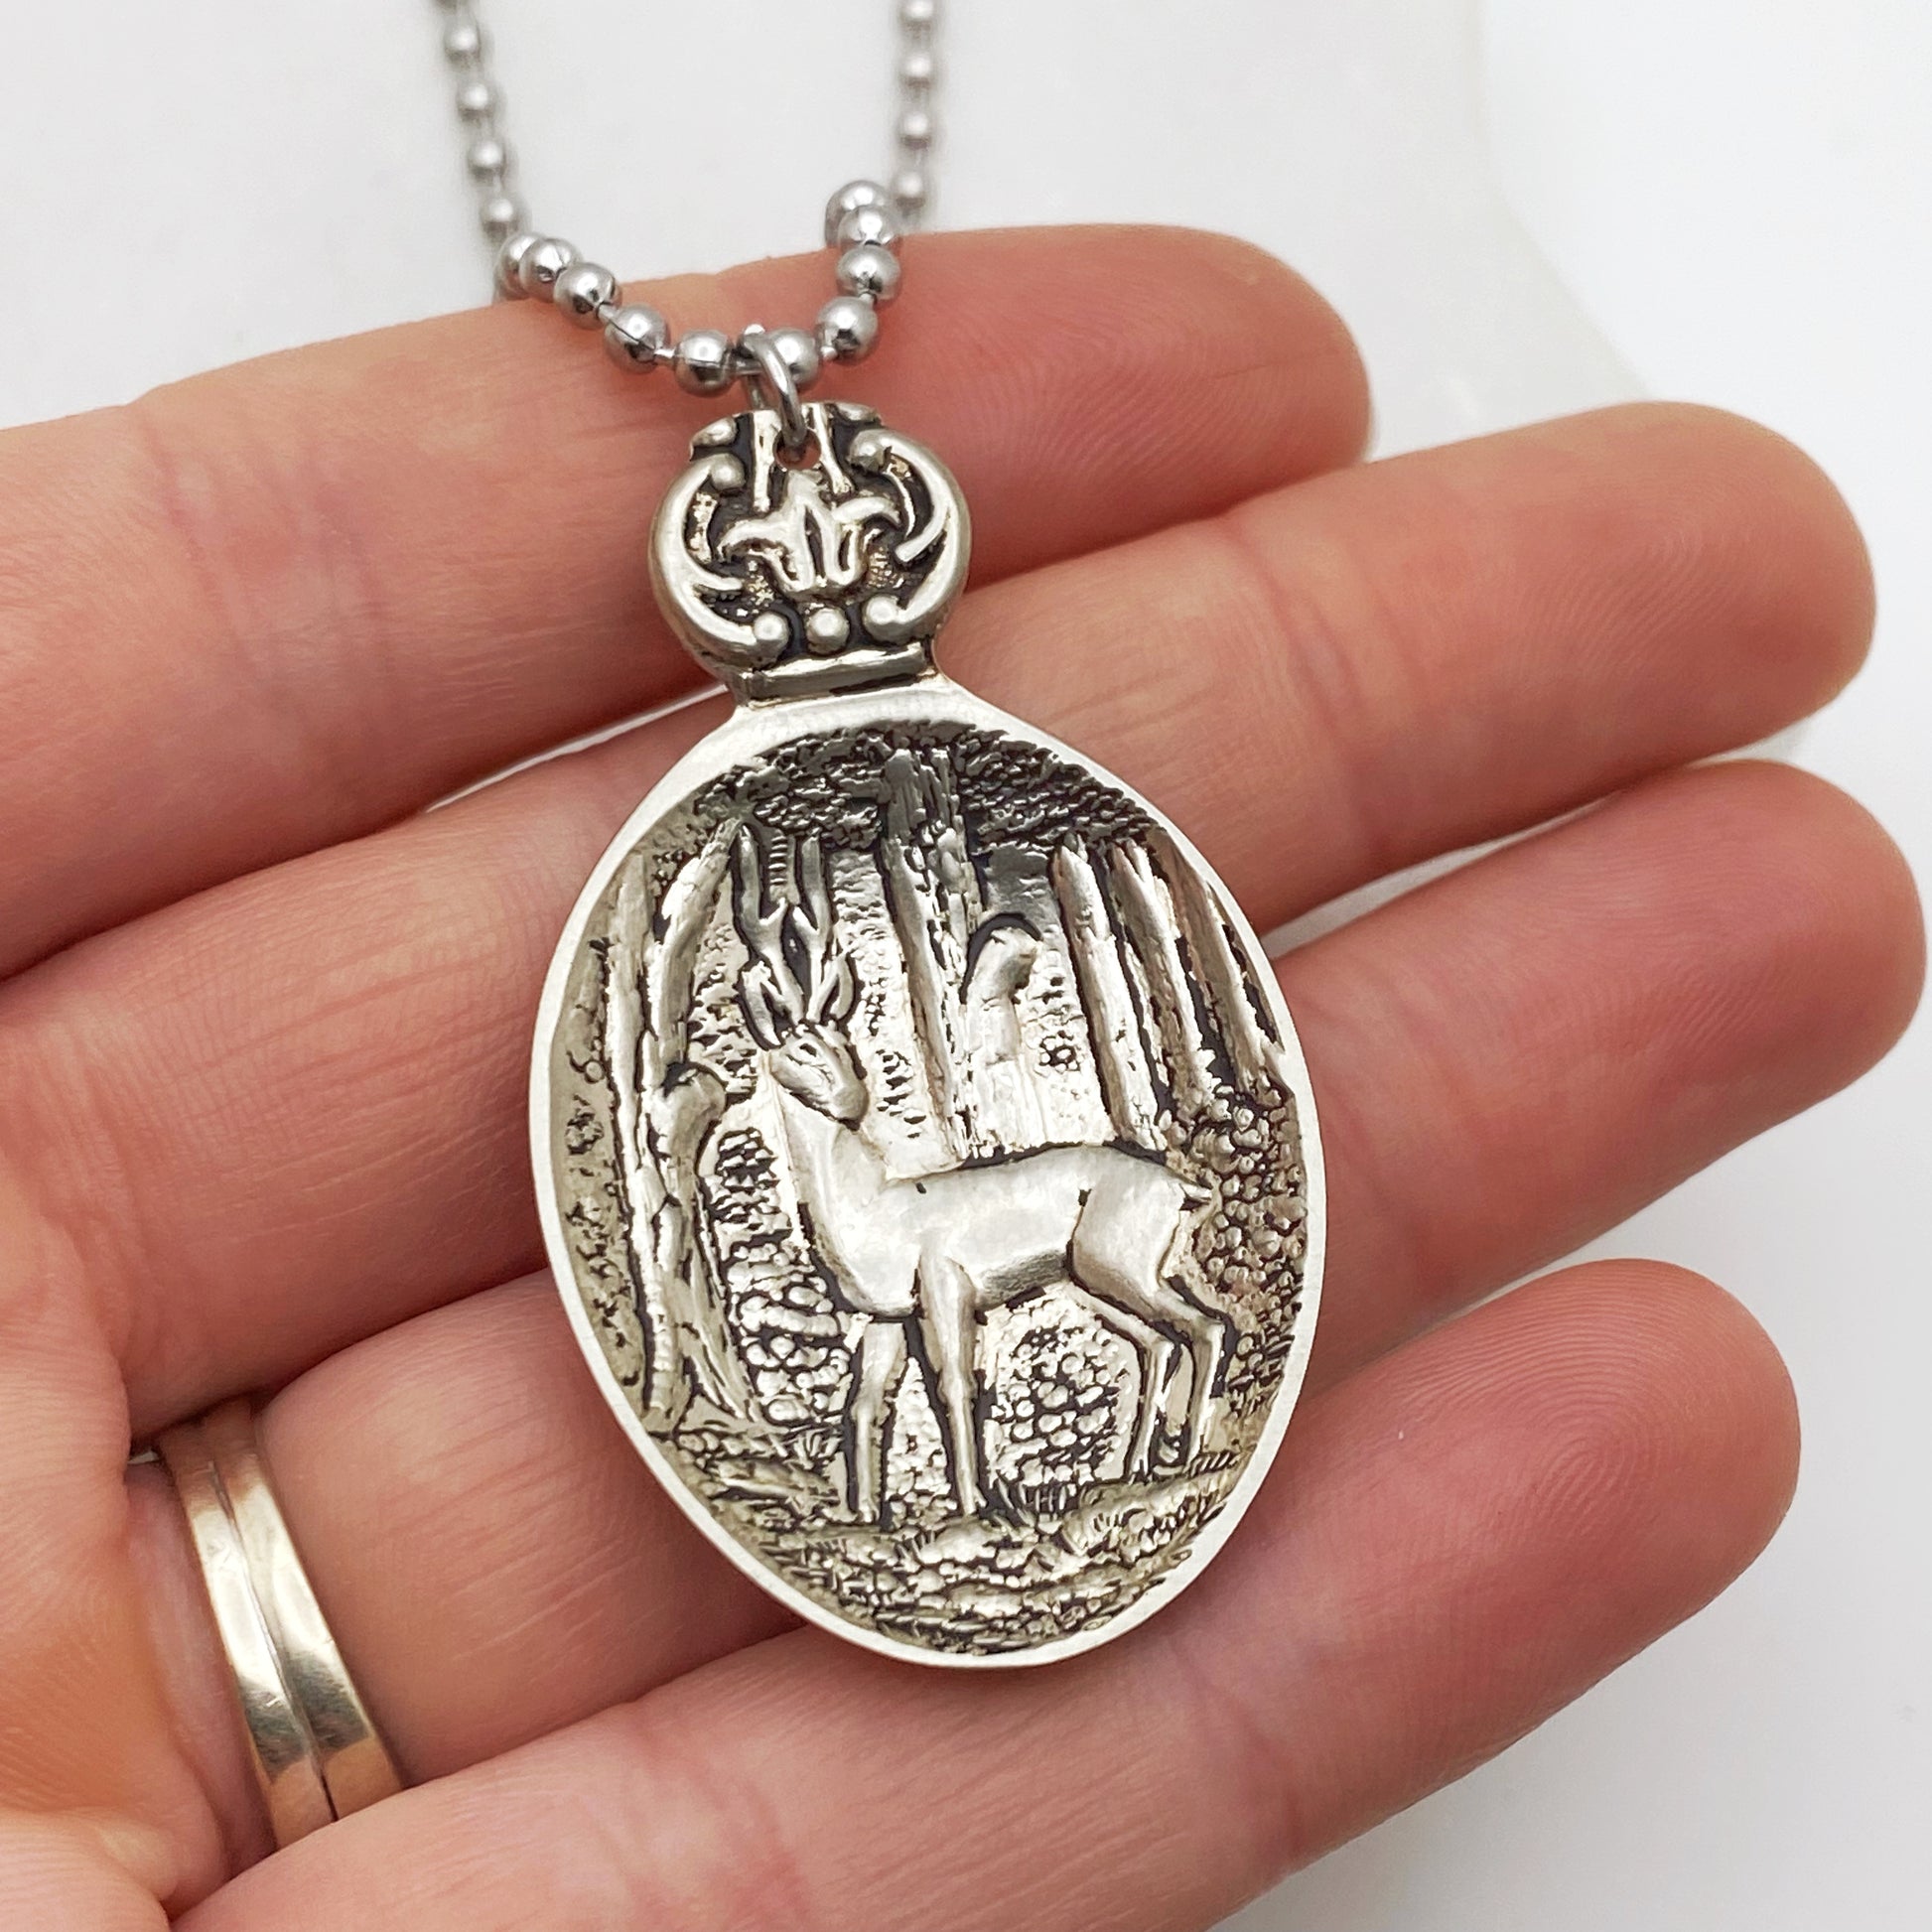 The Forest Pendant, Deer Jewelry, Reclaimed Collector's Spoon Necklace, Vintage Souvenir Spoon Jewelry Necklaces callistafaye   